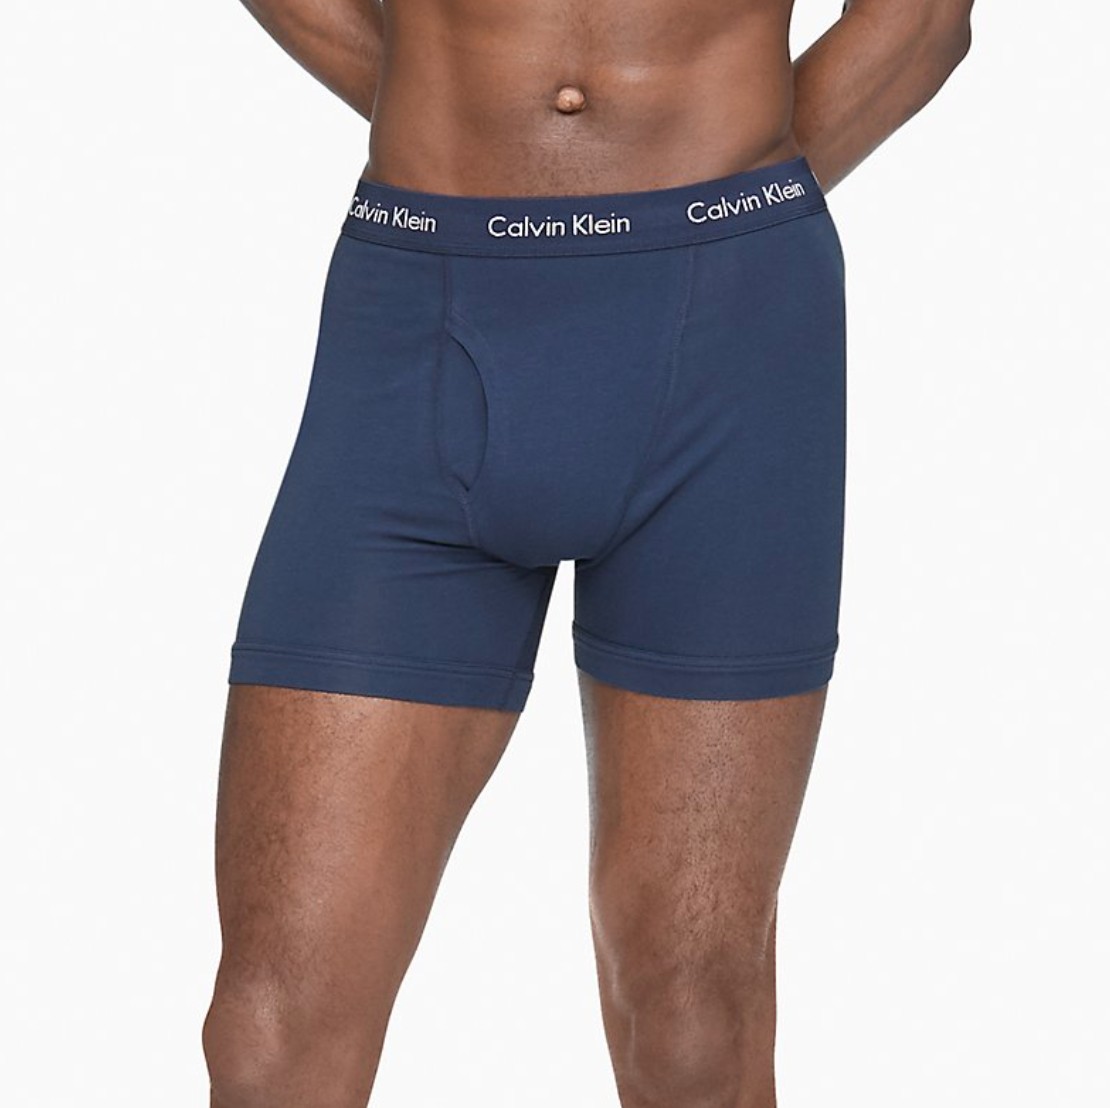 Mack Weldon's Insanely Popular Boxer Briefs Are Back in Stock Right Now